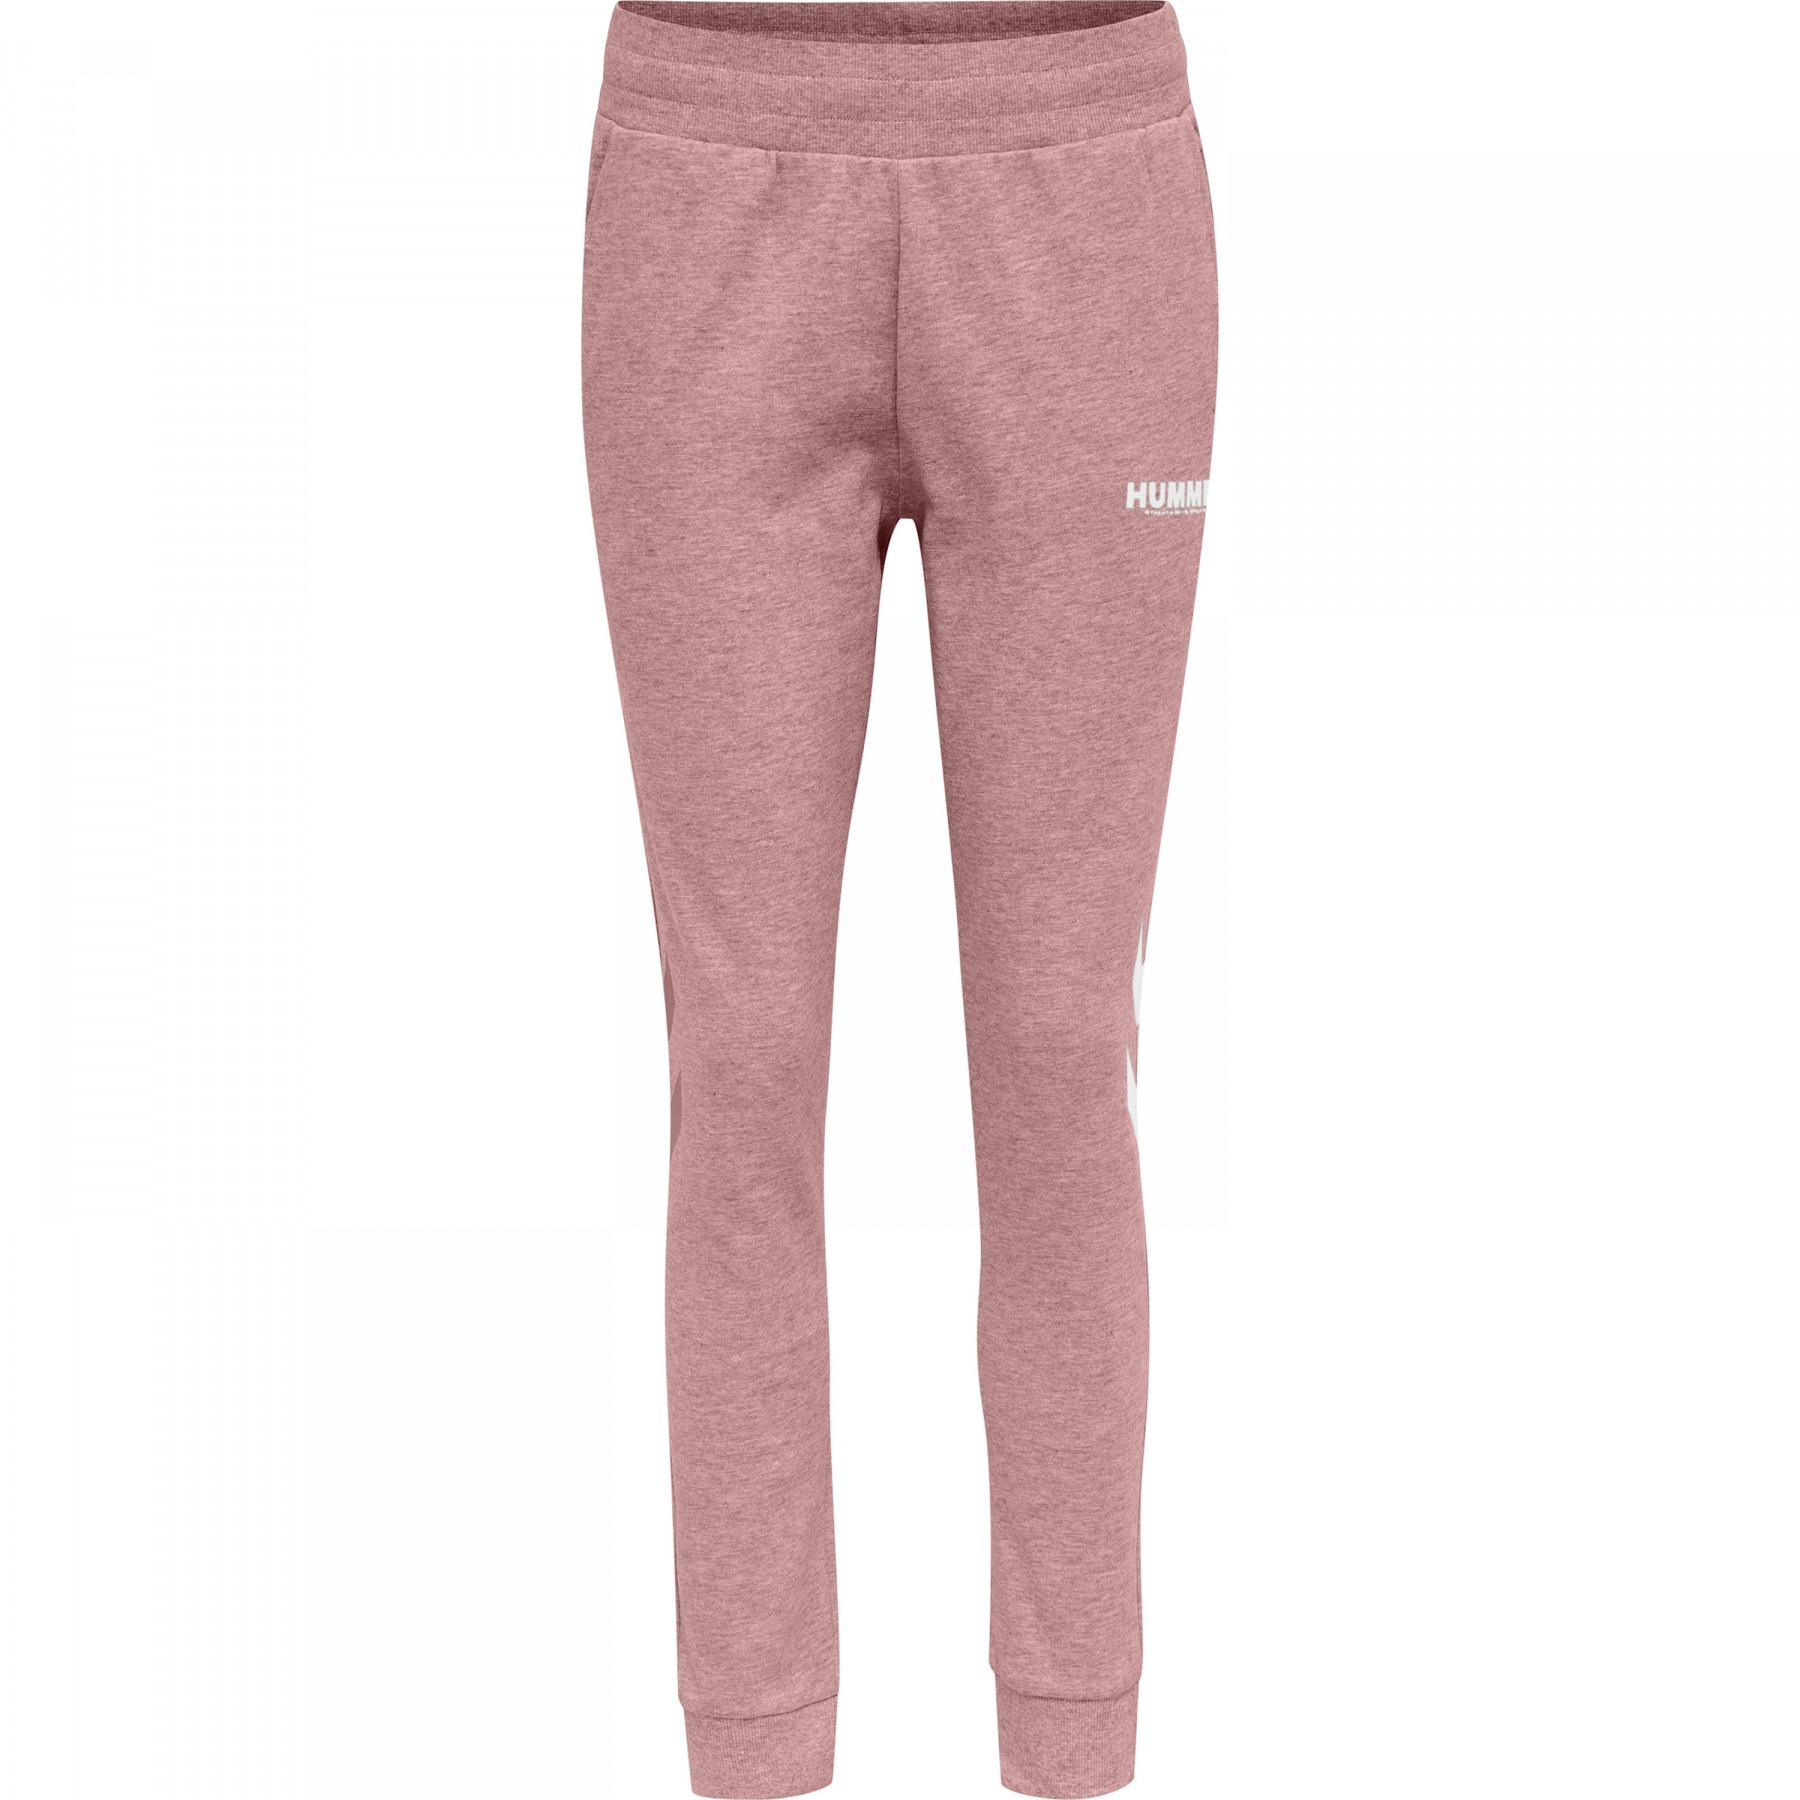 Women's trousers Hummel hmllegacy tapered